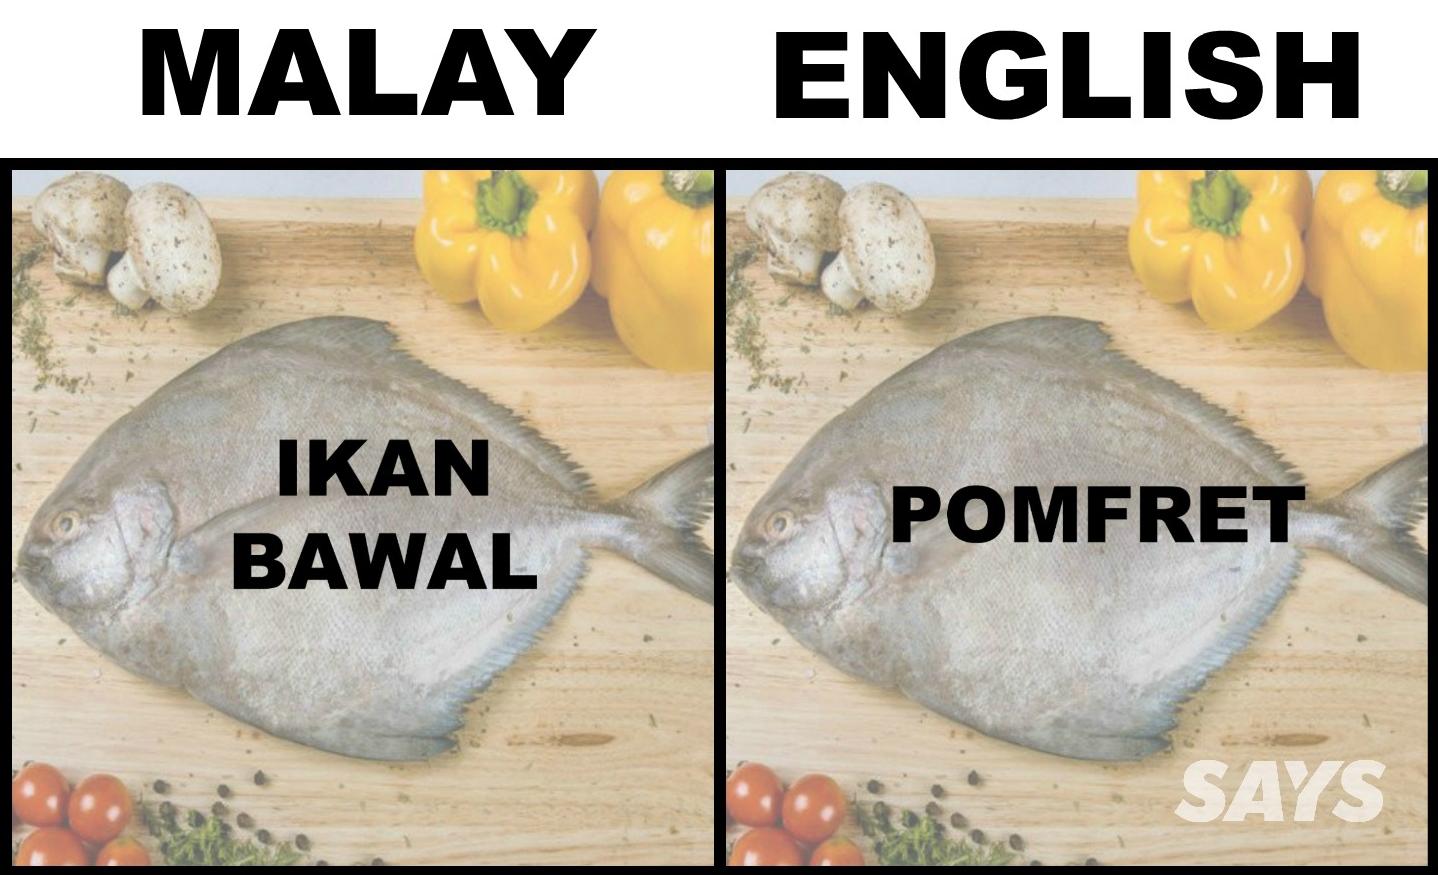 What's Ikan Patin In English? Here Are 17 Translations Of Fish